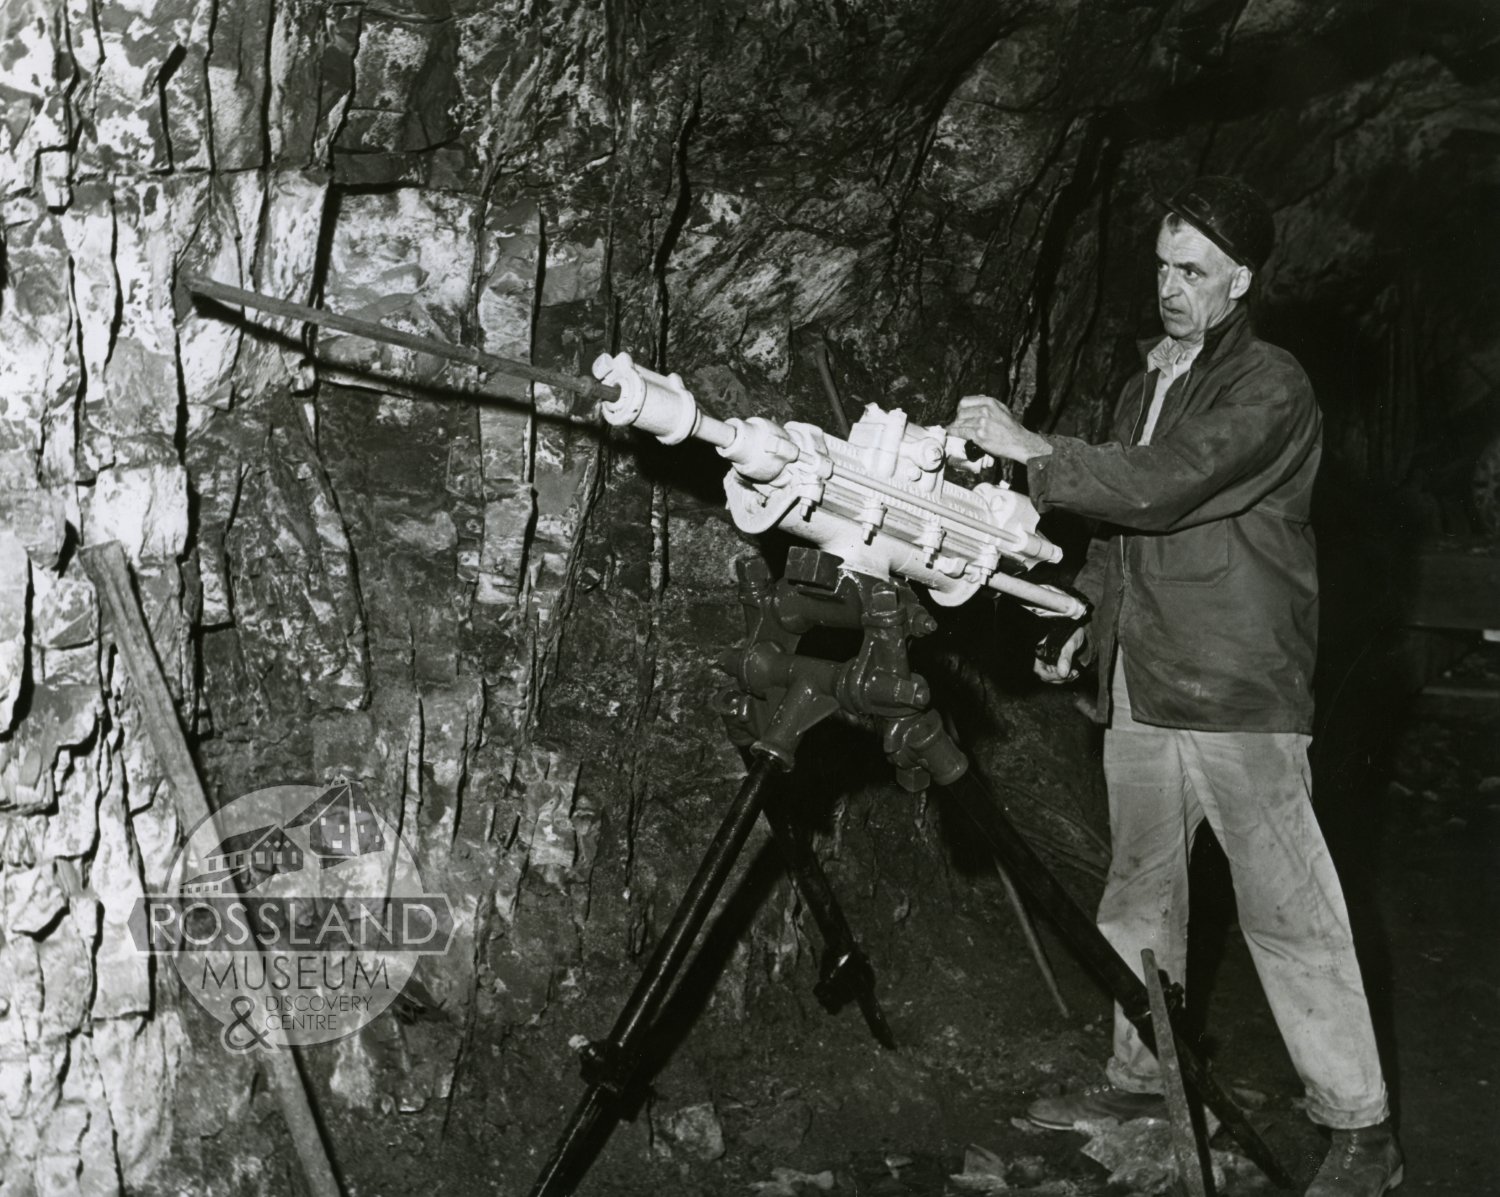 Photo 2276.0125: Roger Terhune using a 1930 vintage Little Giant drill at the Rossland Museum underground tunnel, 1968